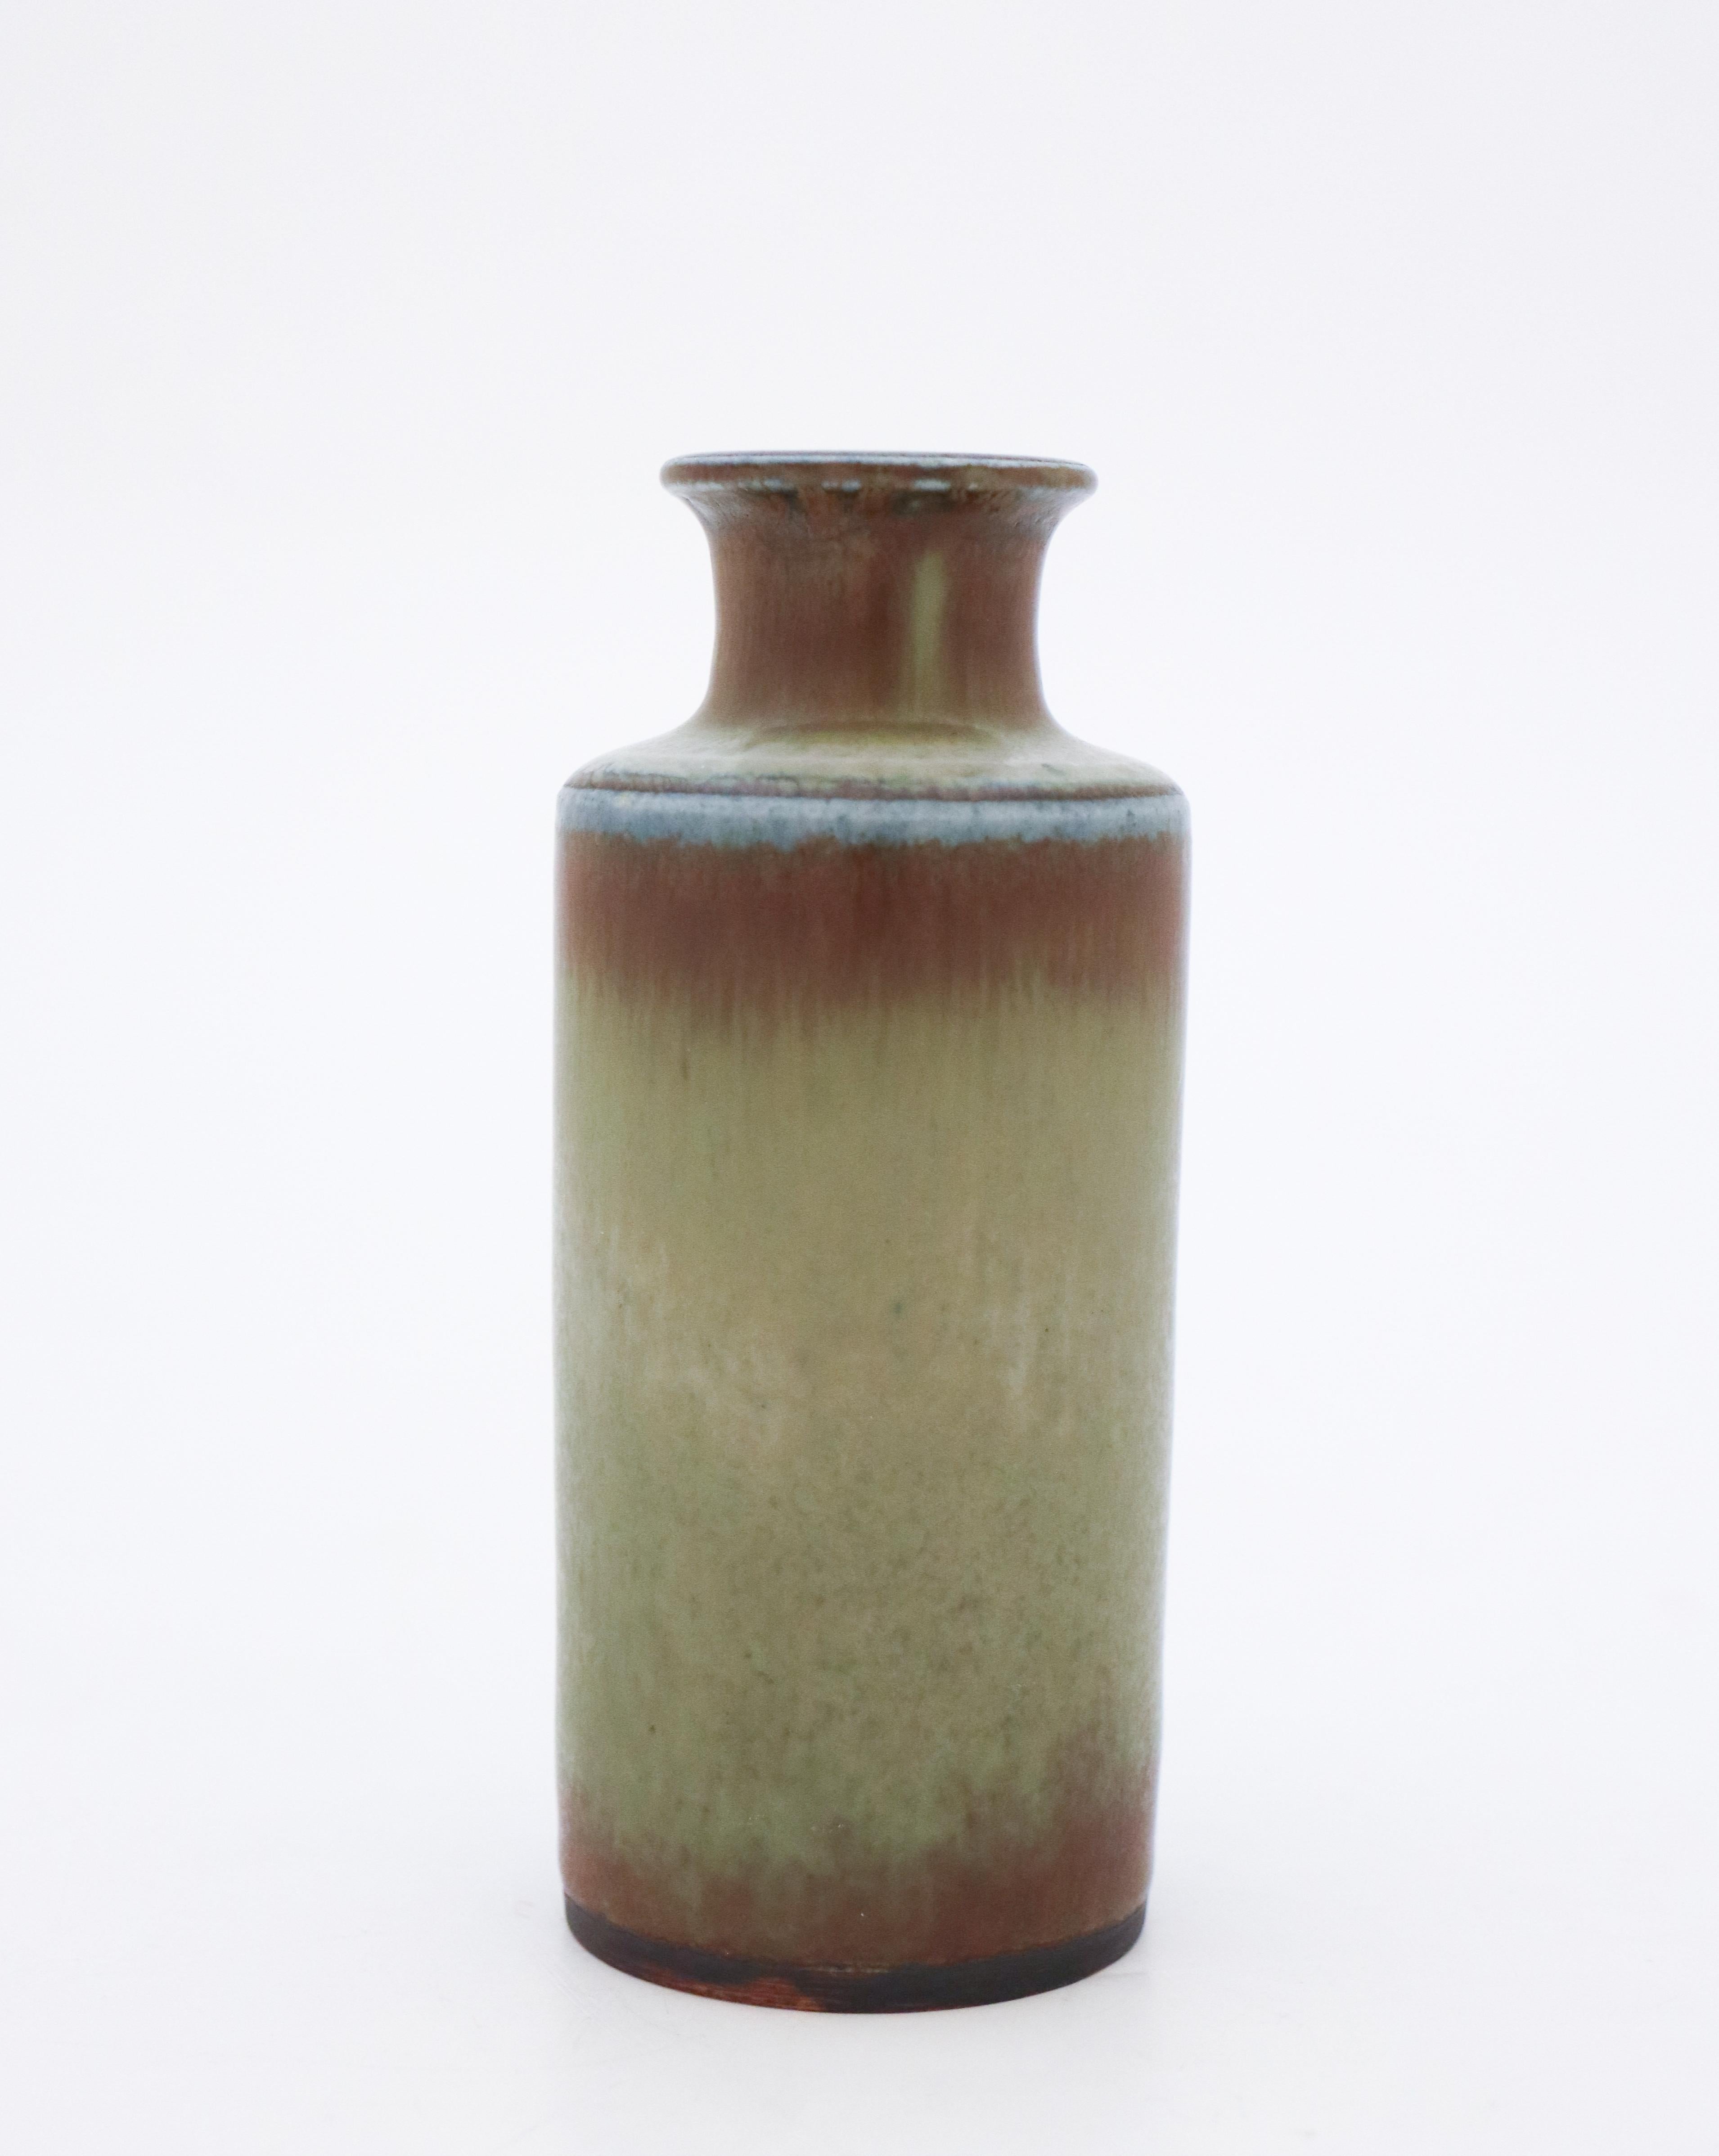 A lovely Midcentury Swedish vase in ceramics designed by Carl-Harry Stålhane at Rörstrand. The vase has a lovely green glaze. The vase is 12.5 cm high and in mint condition. This vase is unique and only made in this example as you can see on the